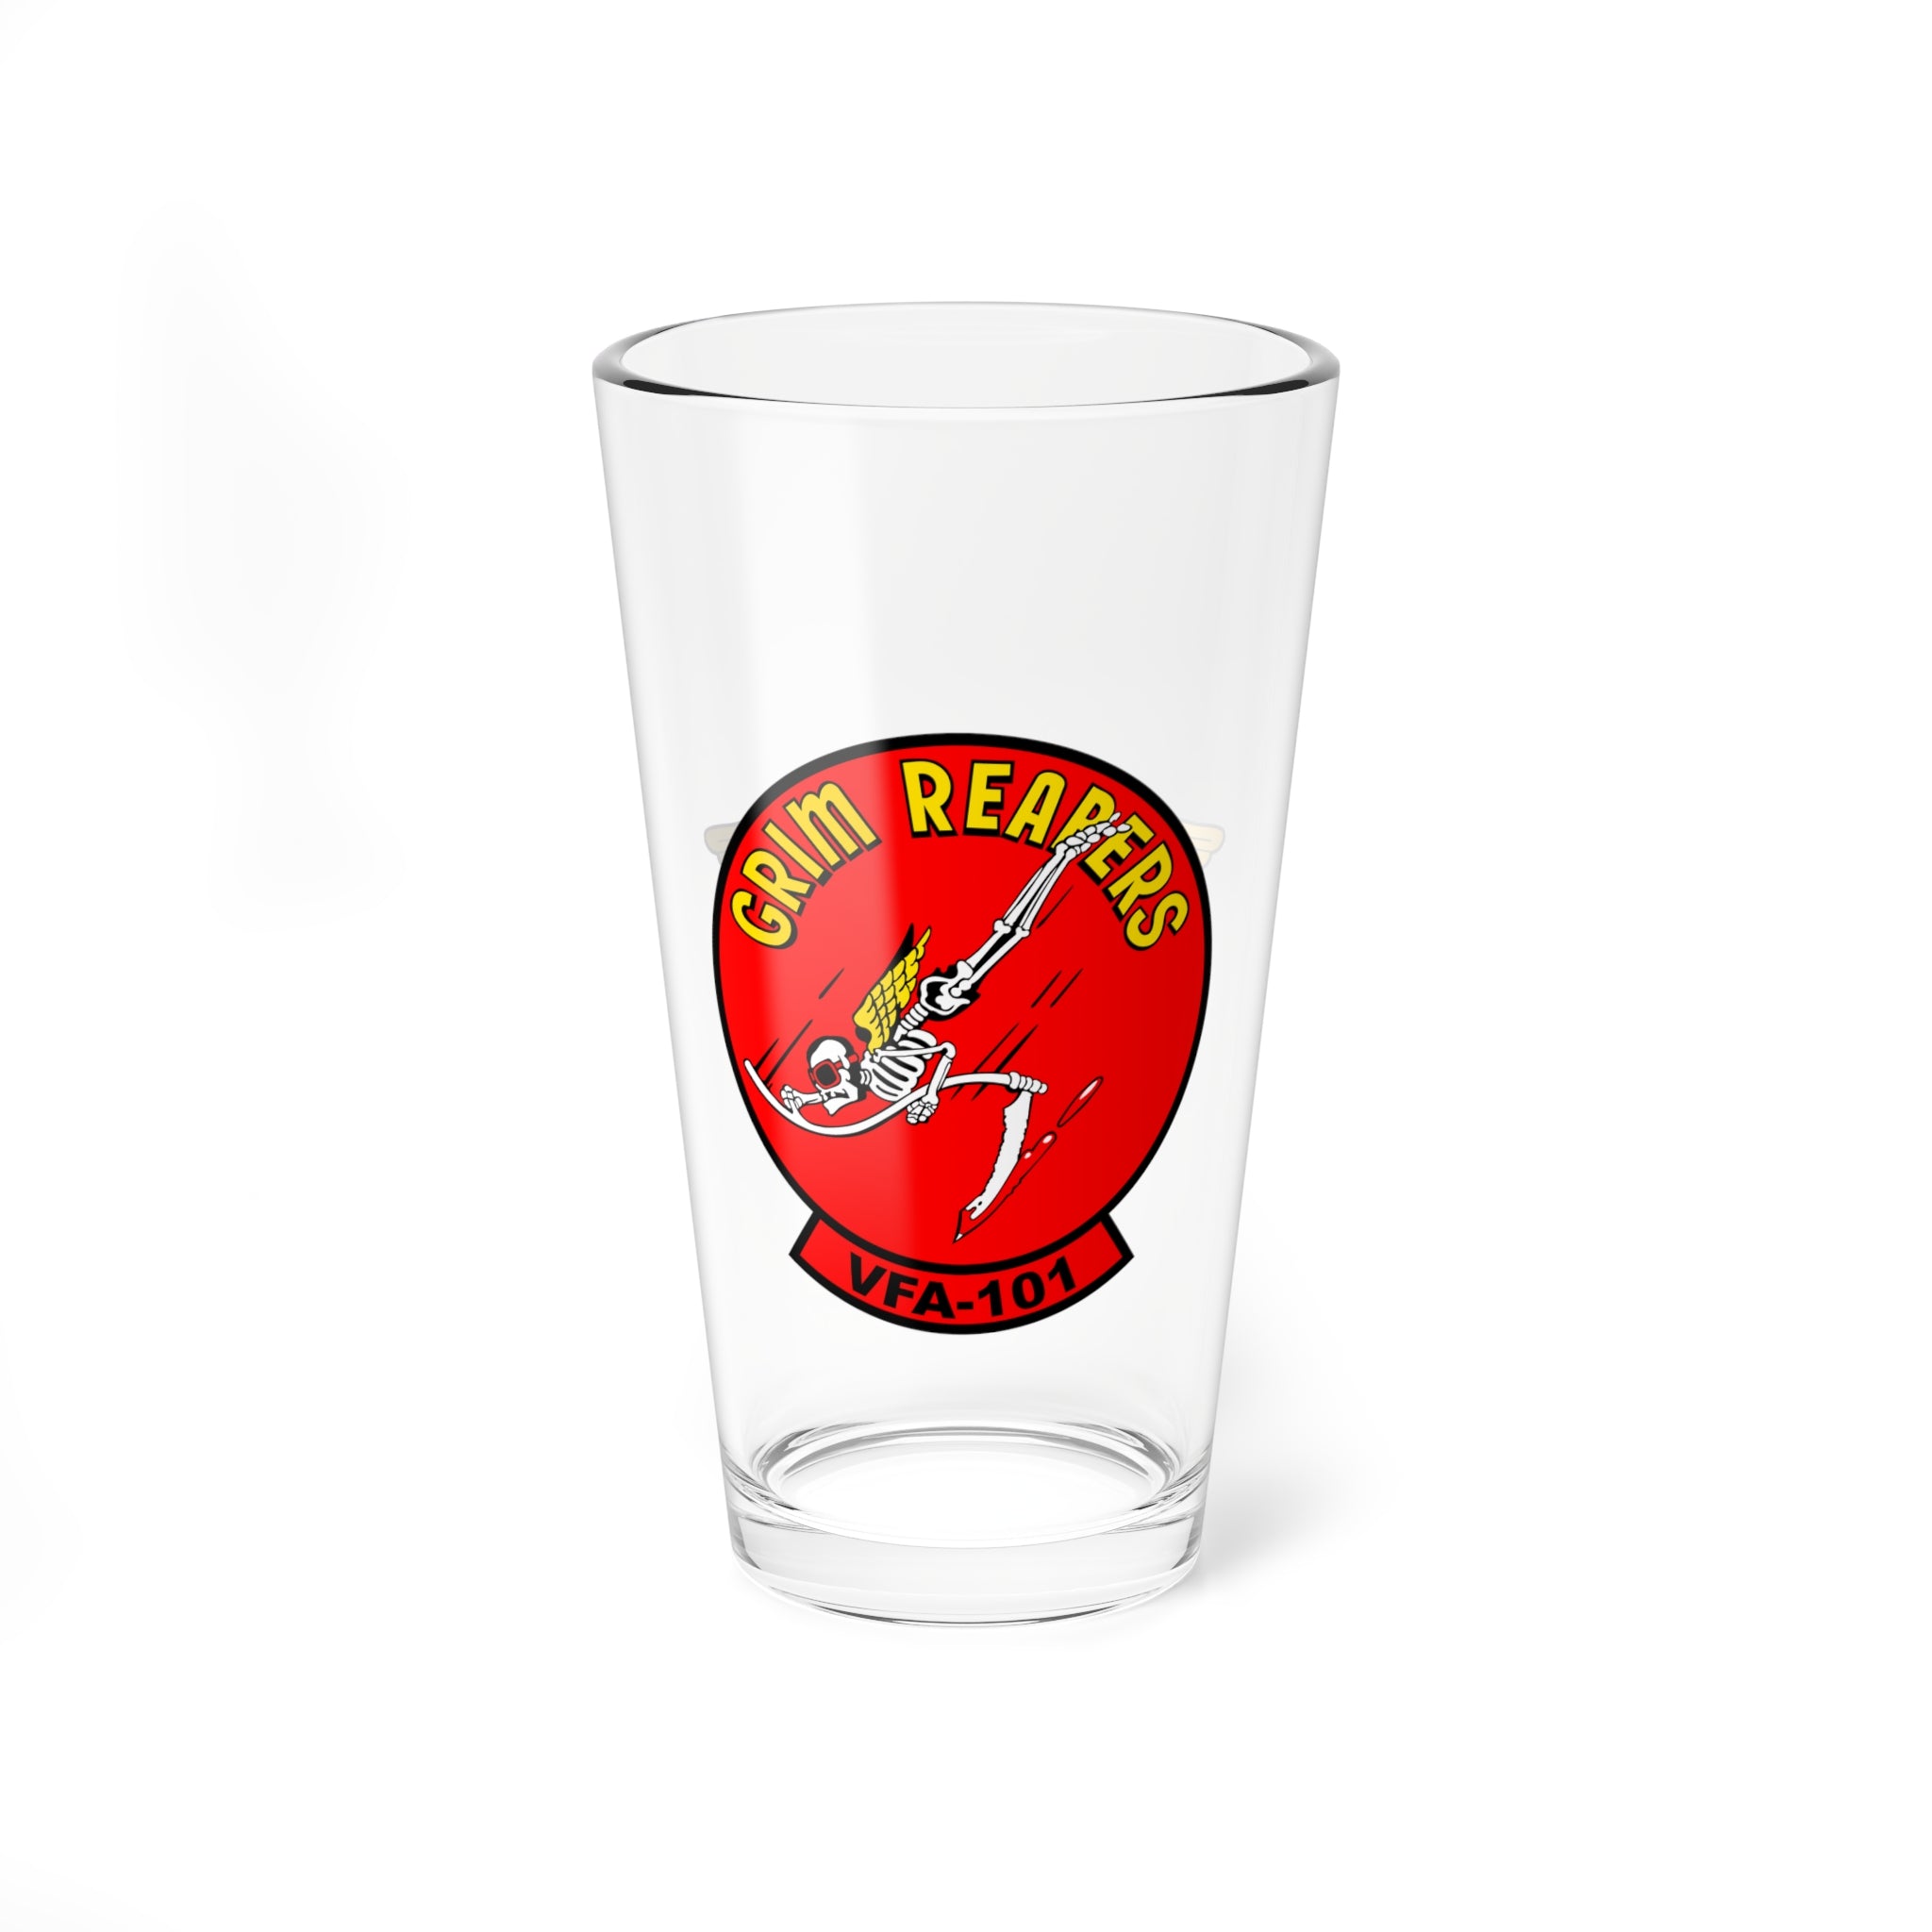 VFA-101"The Grim Reapers" Aviator Pint Glass, Navy Fleet Replacement Squadron Flying the F-35 Lightning II